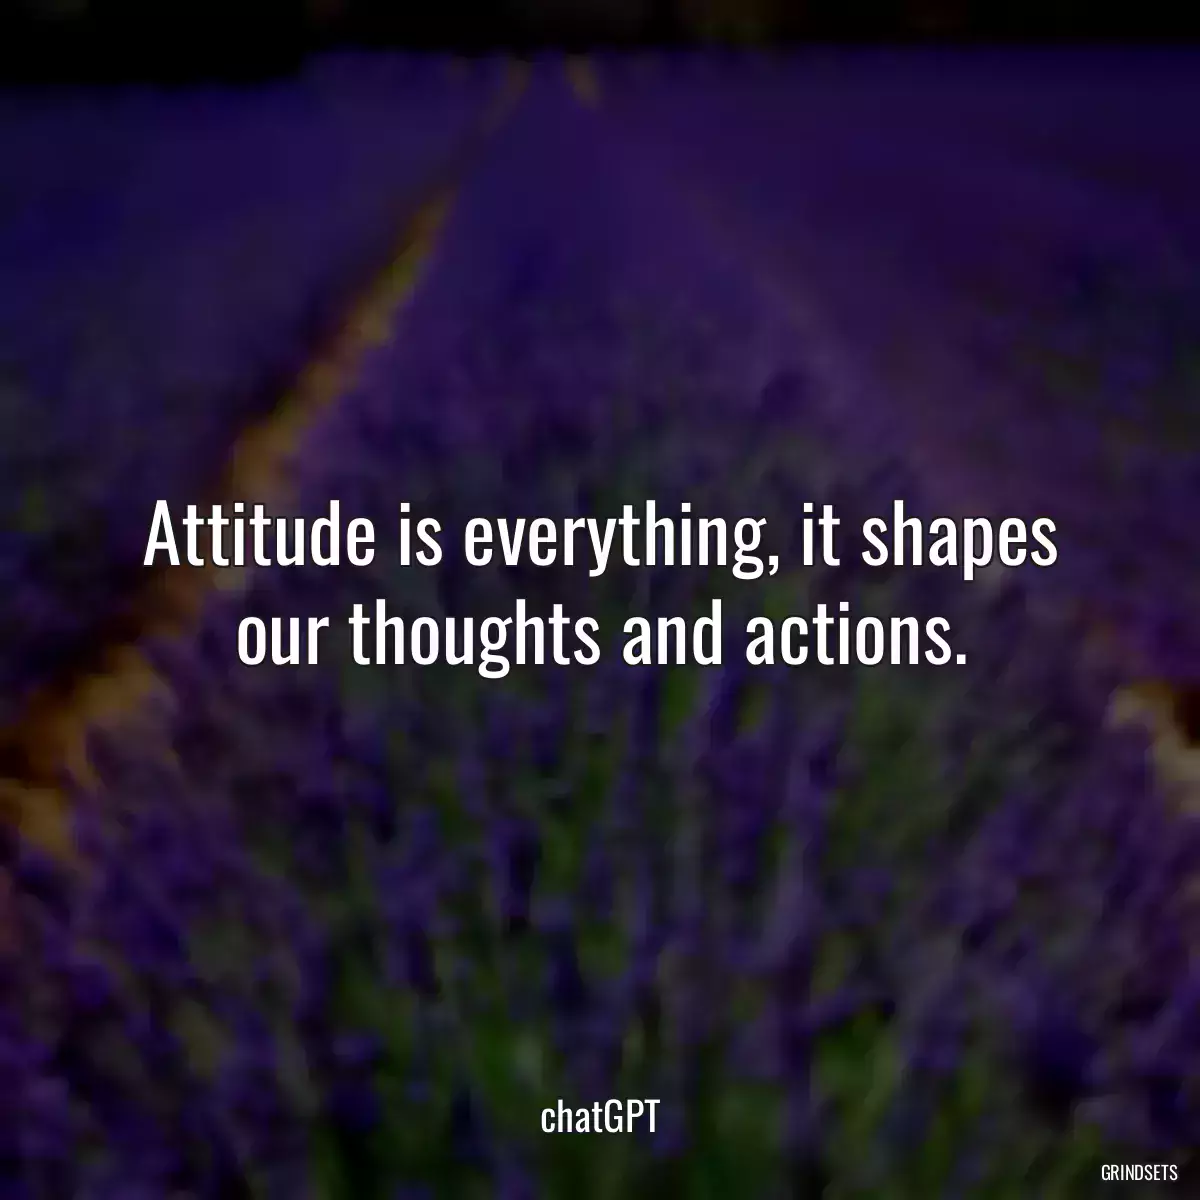 Attitude is everything, it shapes our thoughts and actions.